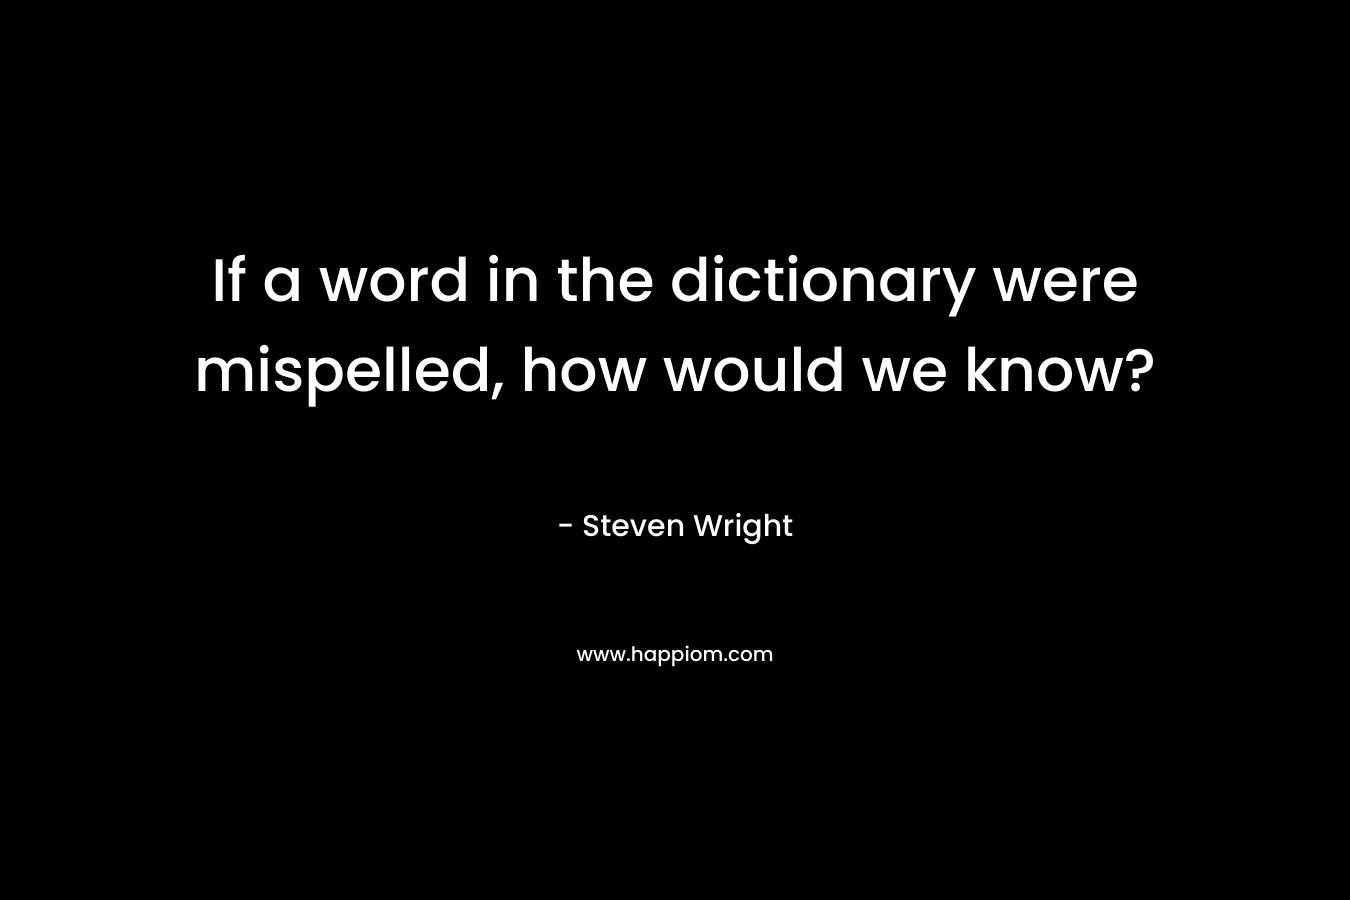 If a word in the dictionary were mispelled, how would we know? – Steven Wright